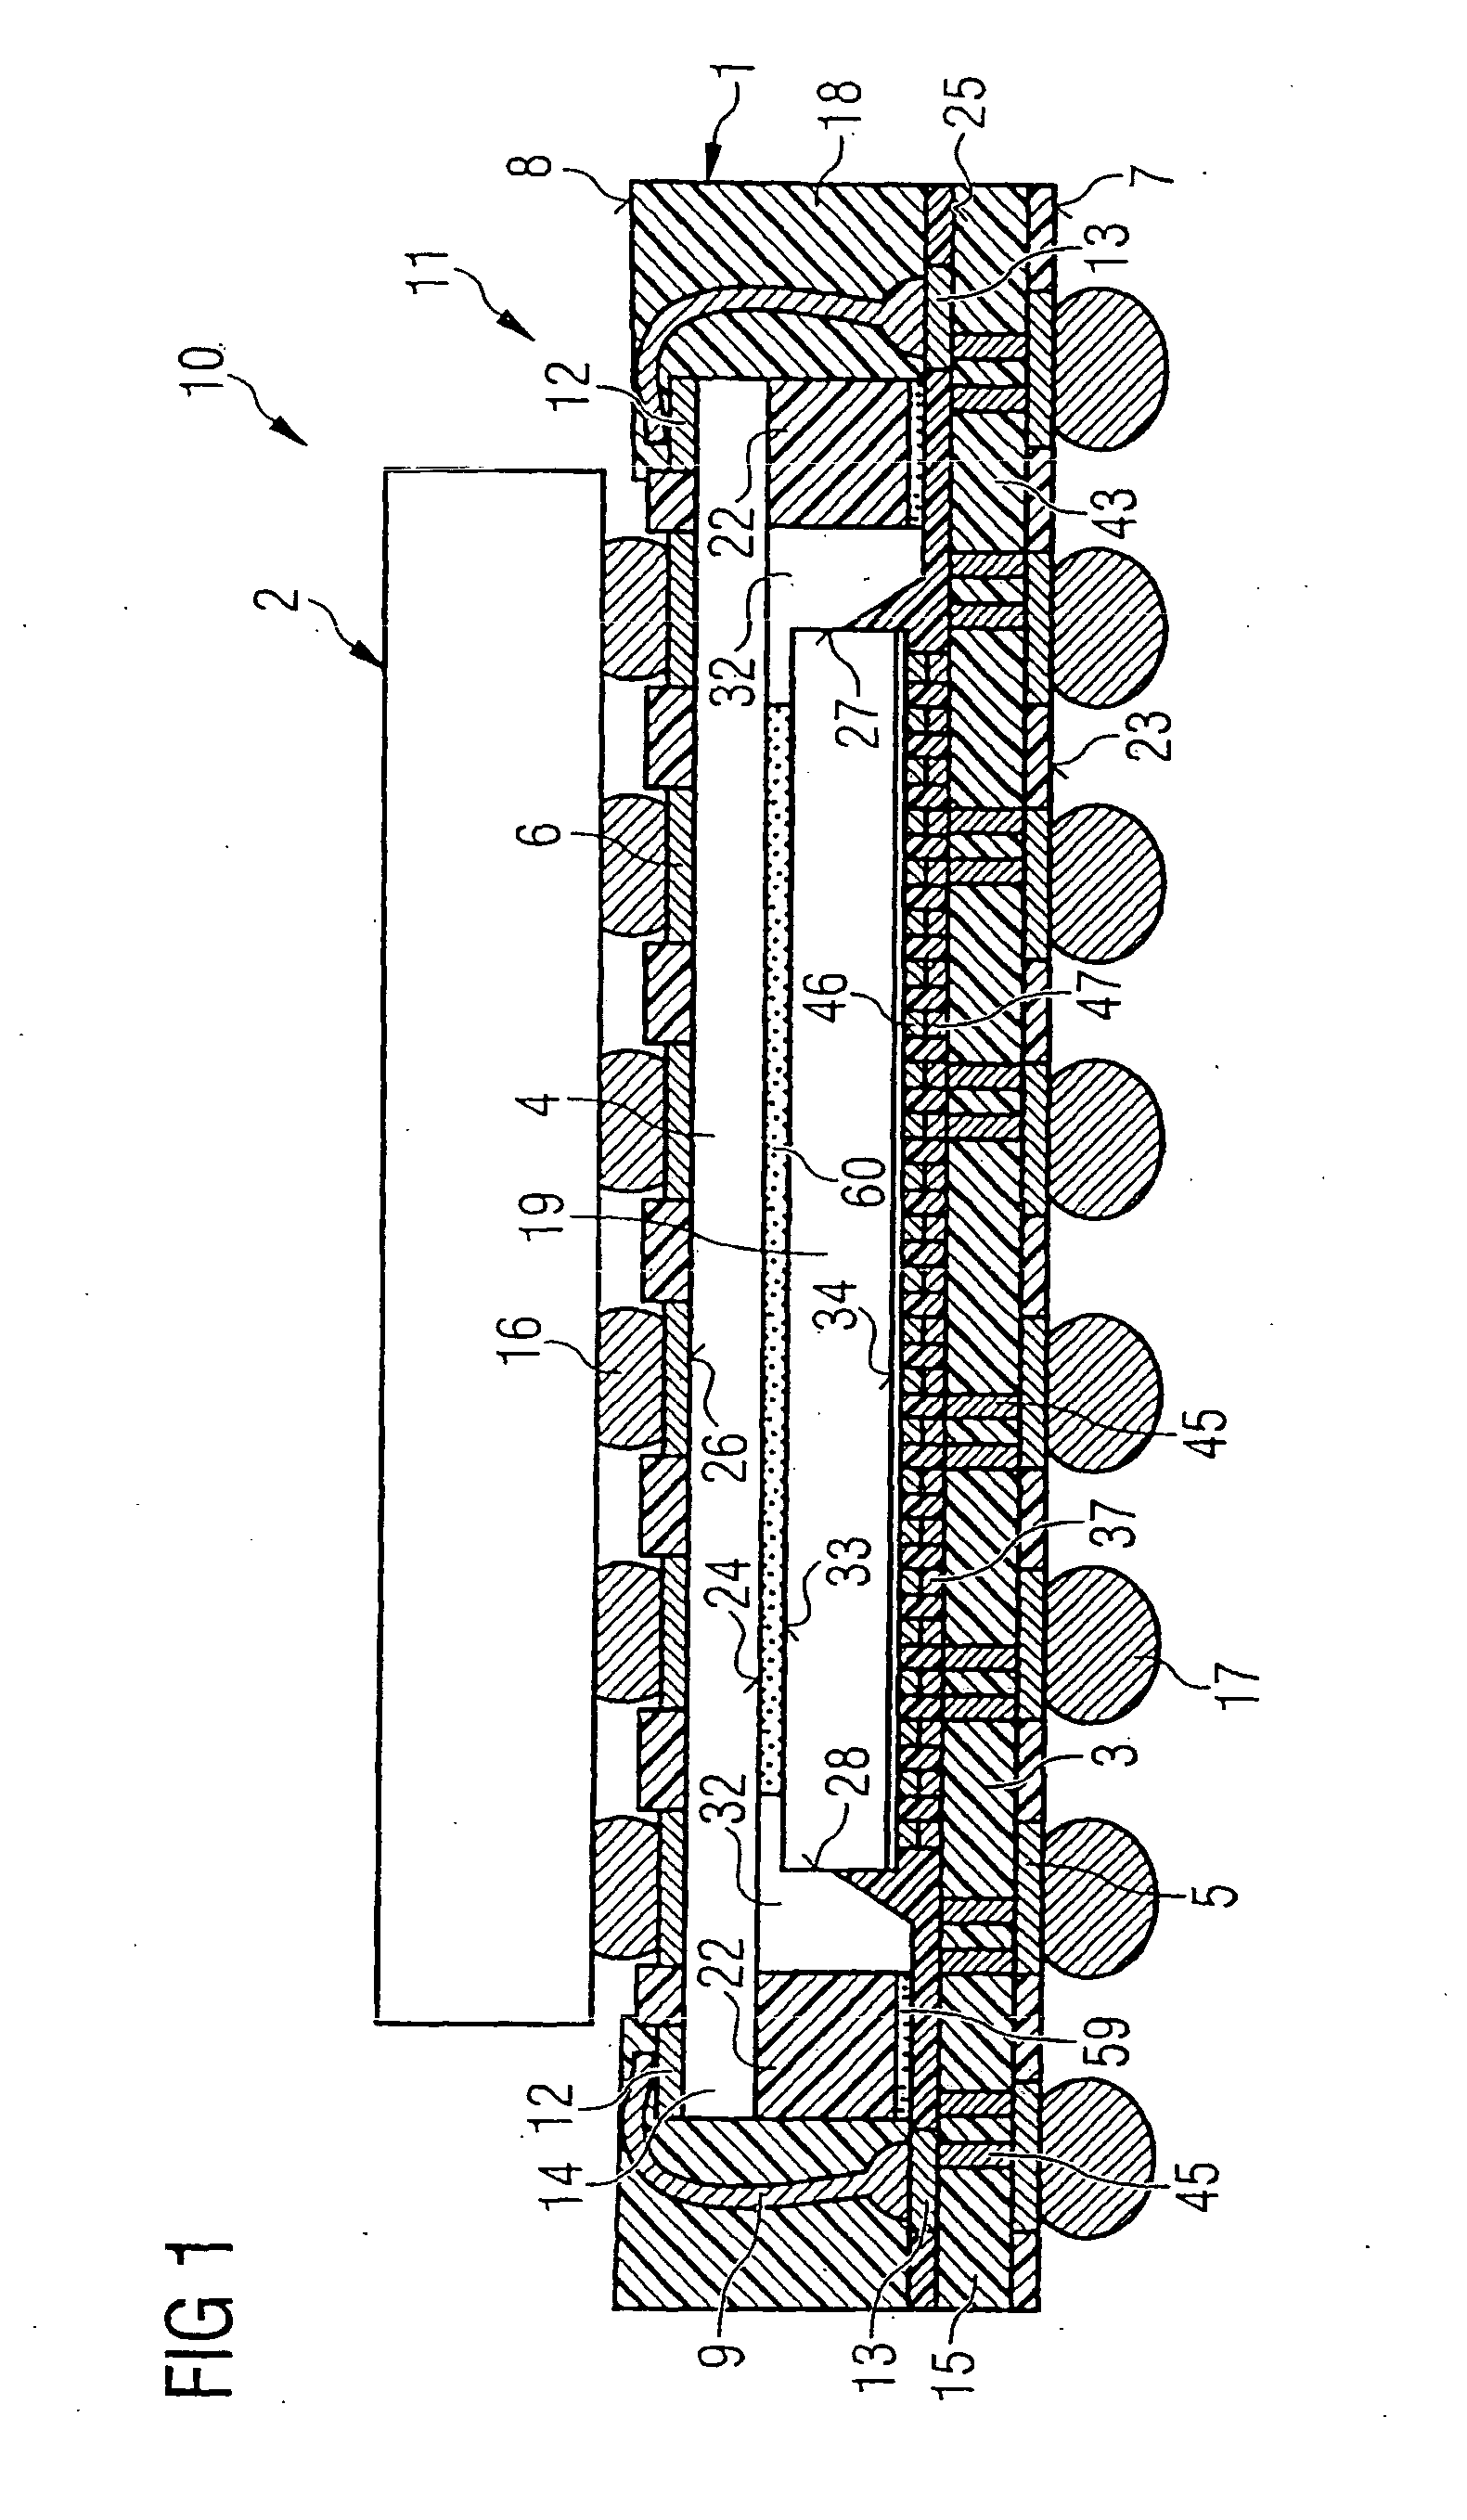 Semiconductor module with a semiconductor stack, and methods for its production